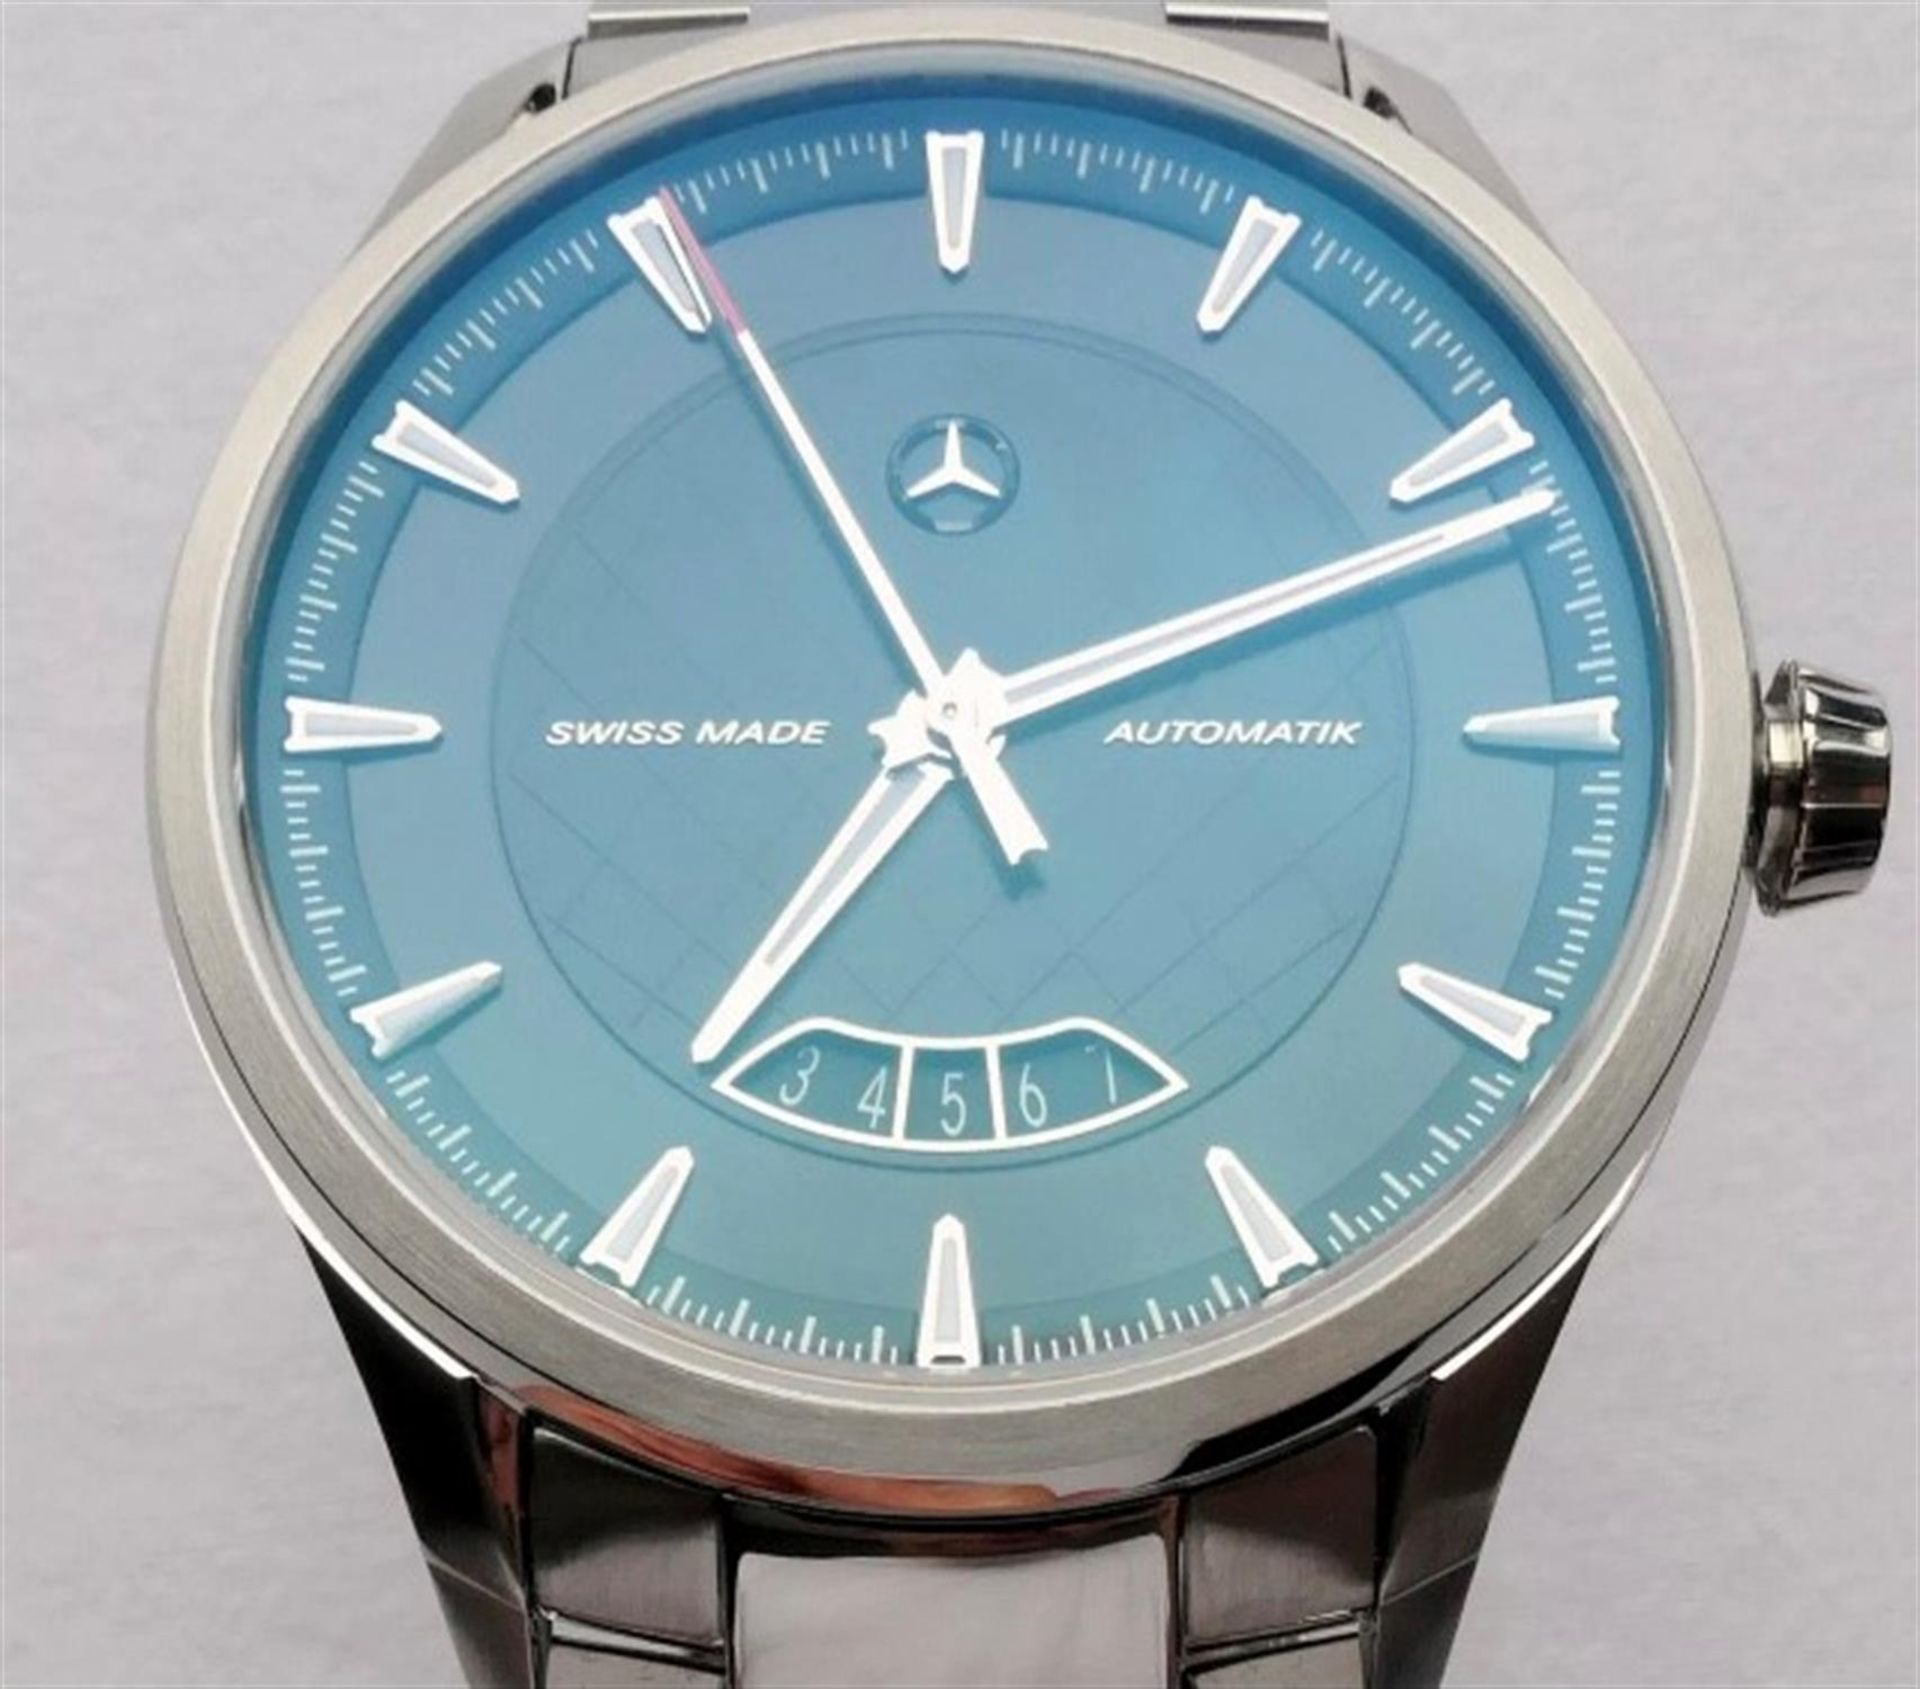 A Brand New Mercedes-Benz Classic Automatic Watch - Image 8 of 10